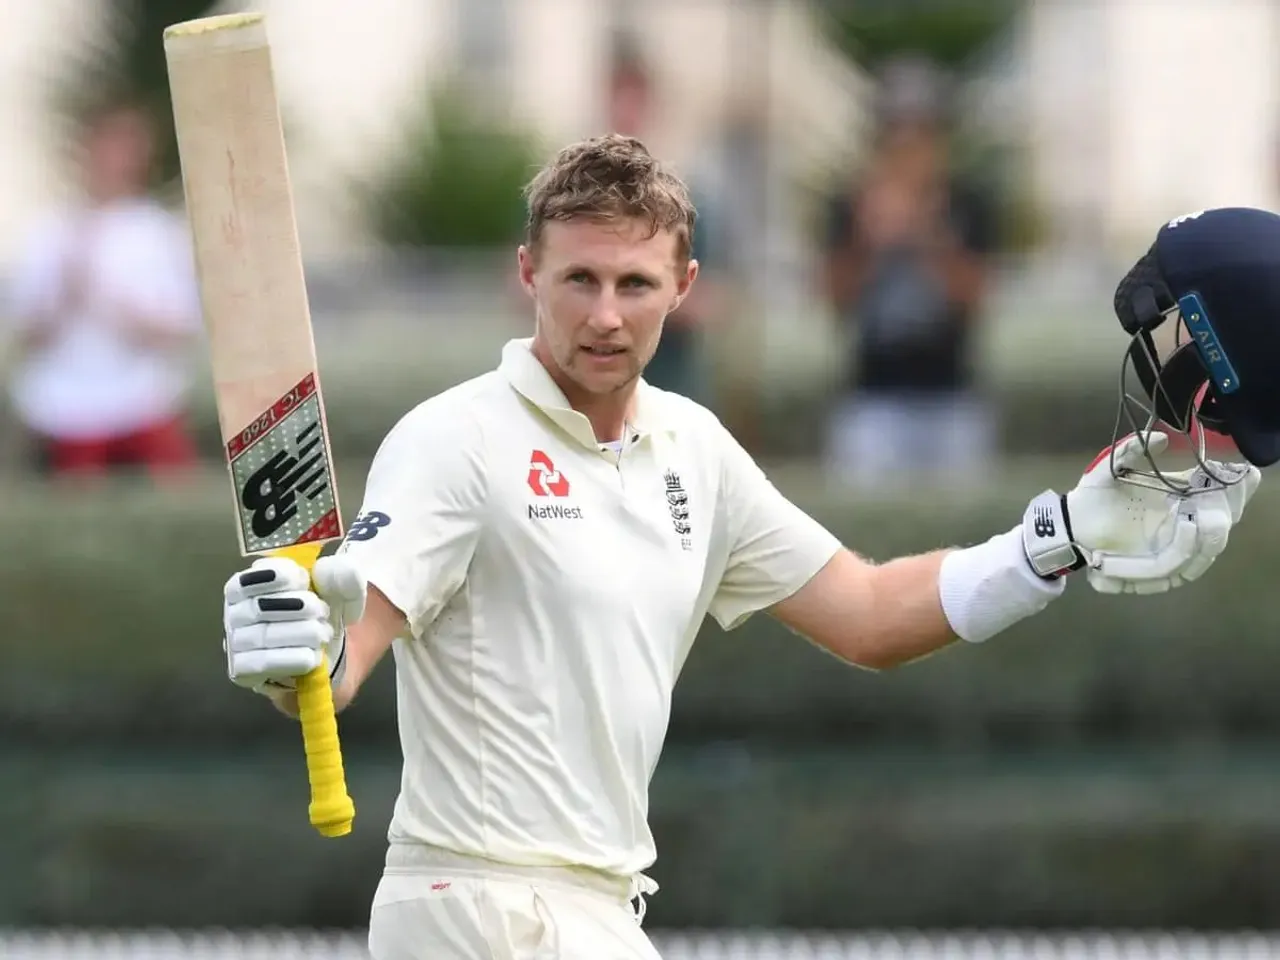 NZvsENG: Joe Root equals Don Bradman's record after being "a bit caught up" in 'Bazball'